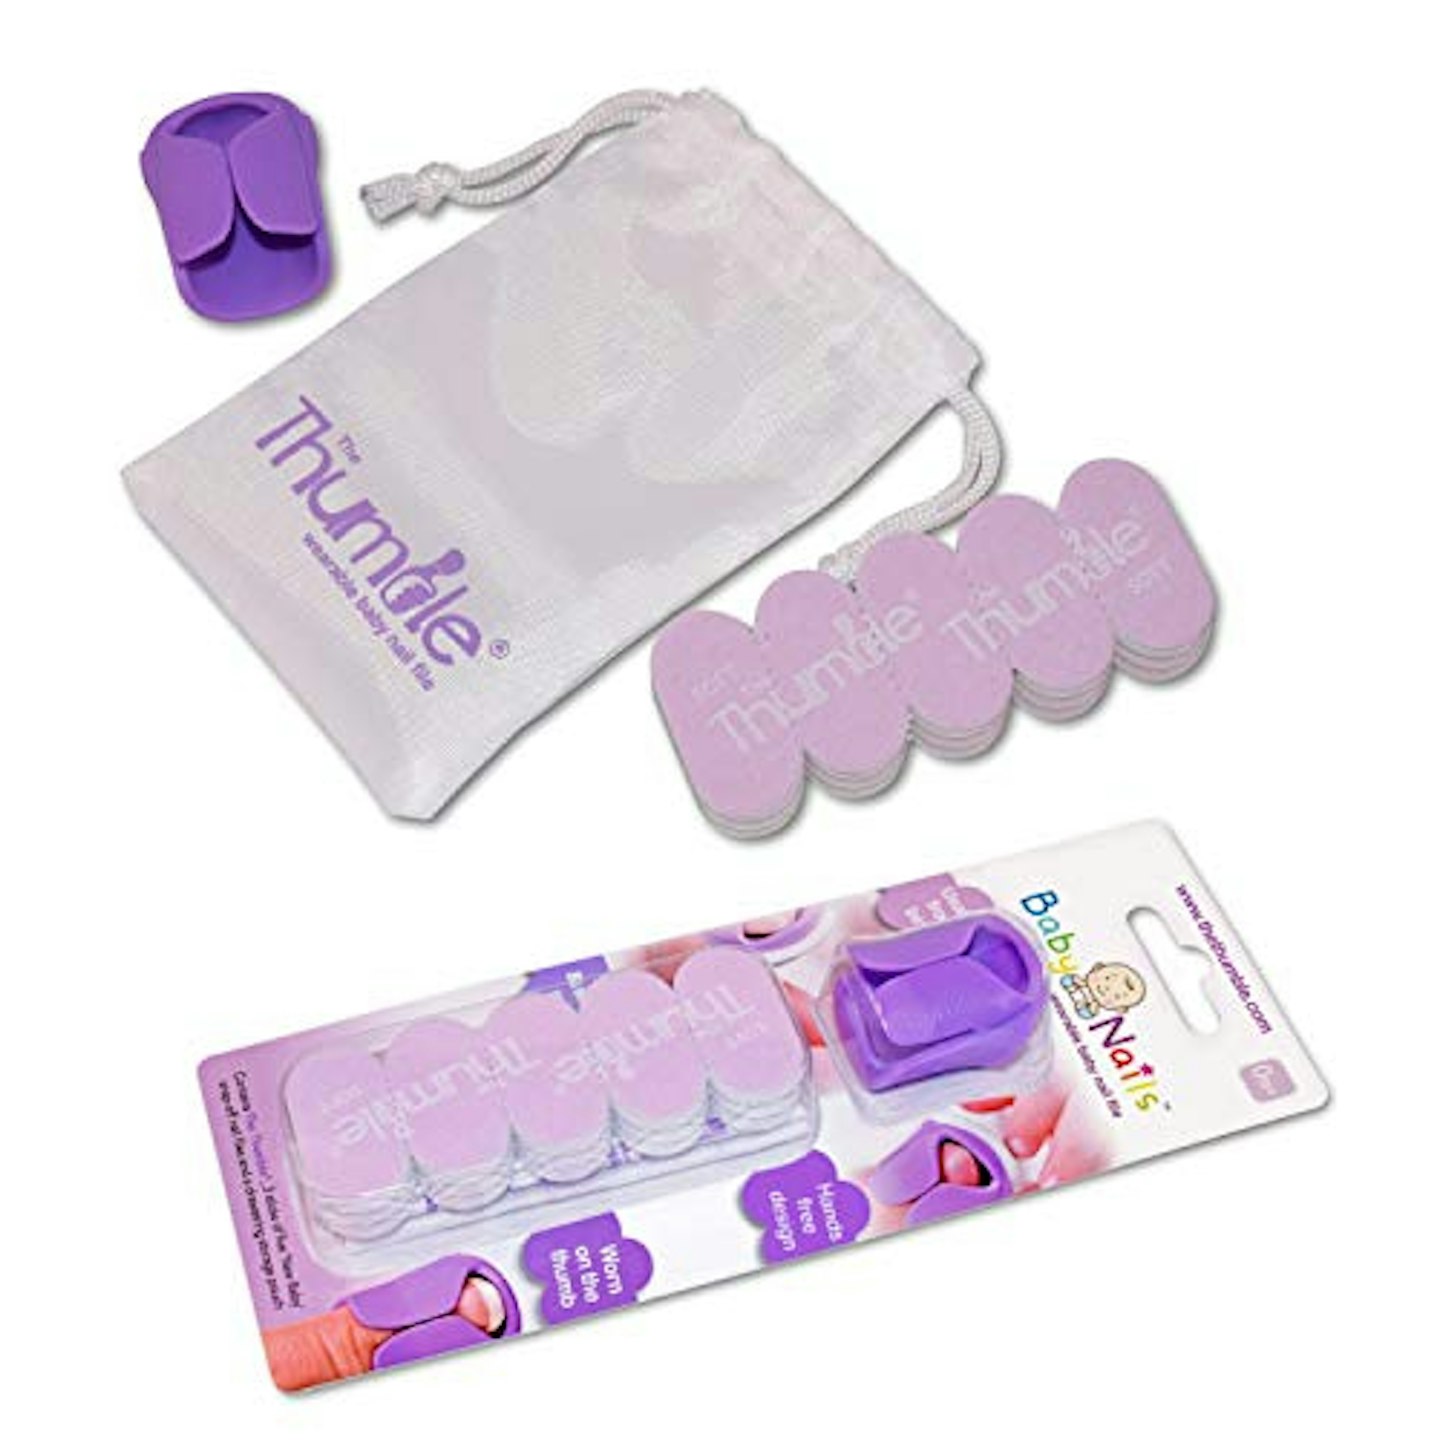 Baby Nailsu2122 - The Wearable Baby Nail File